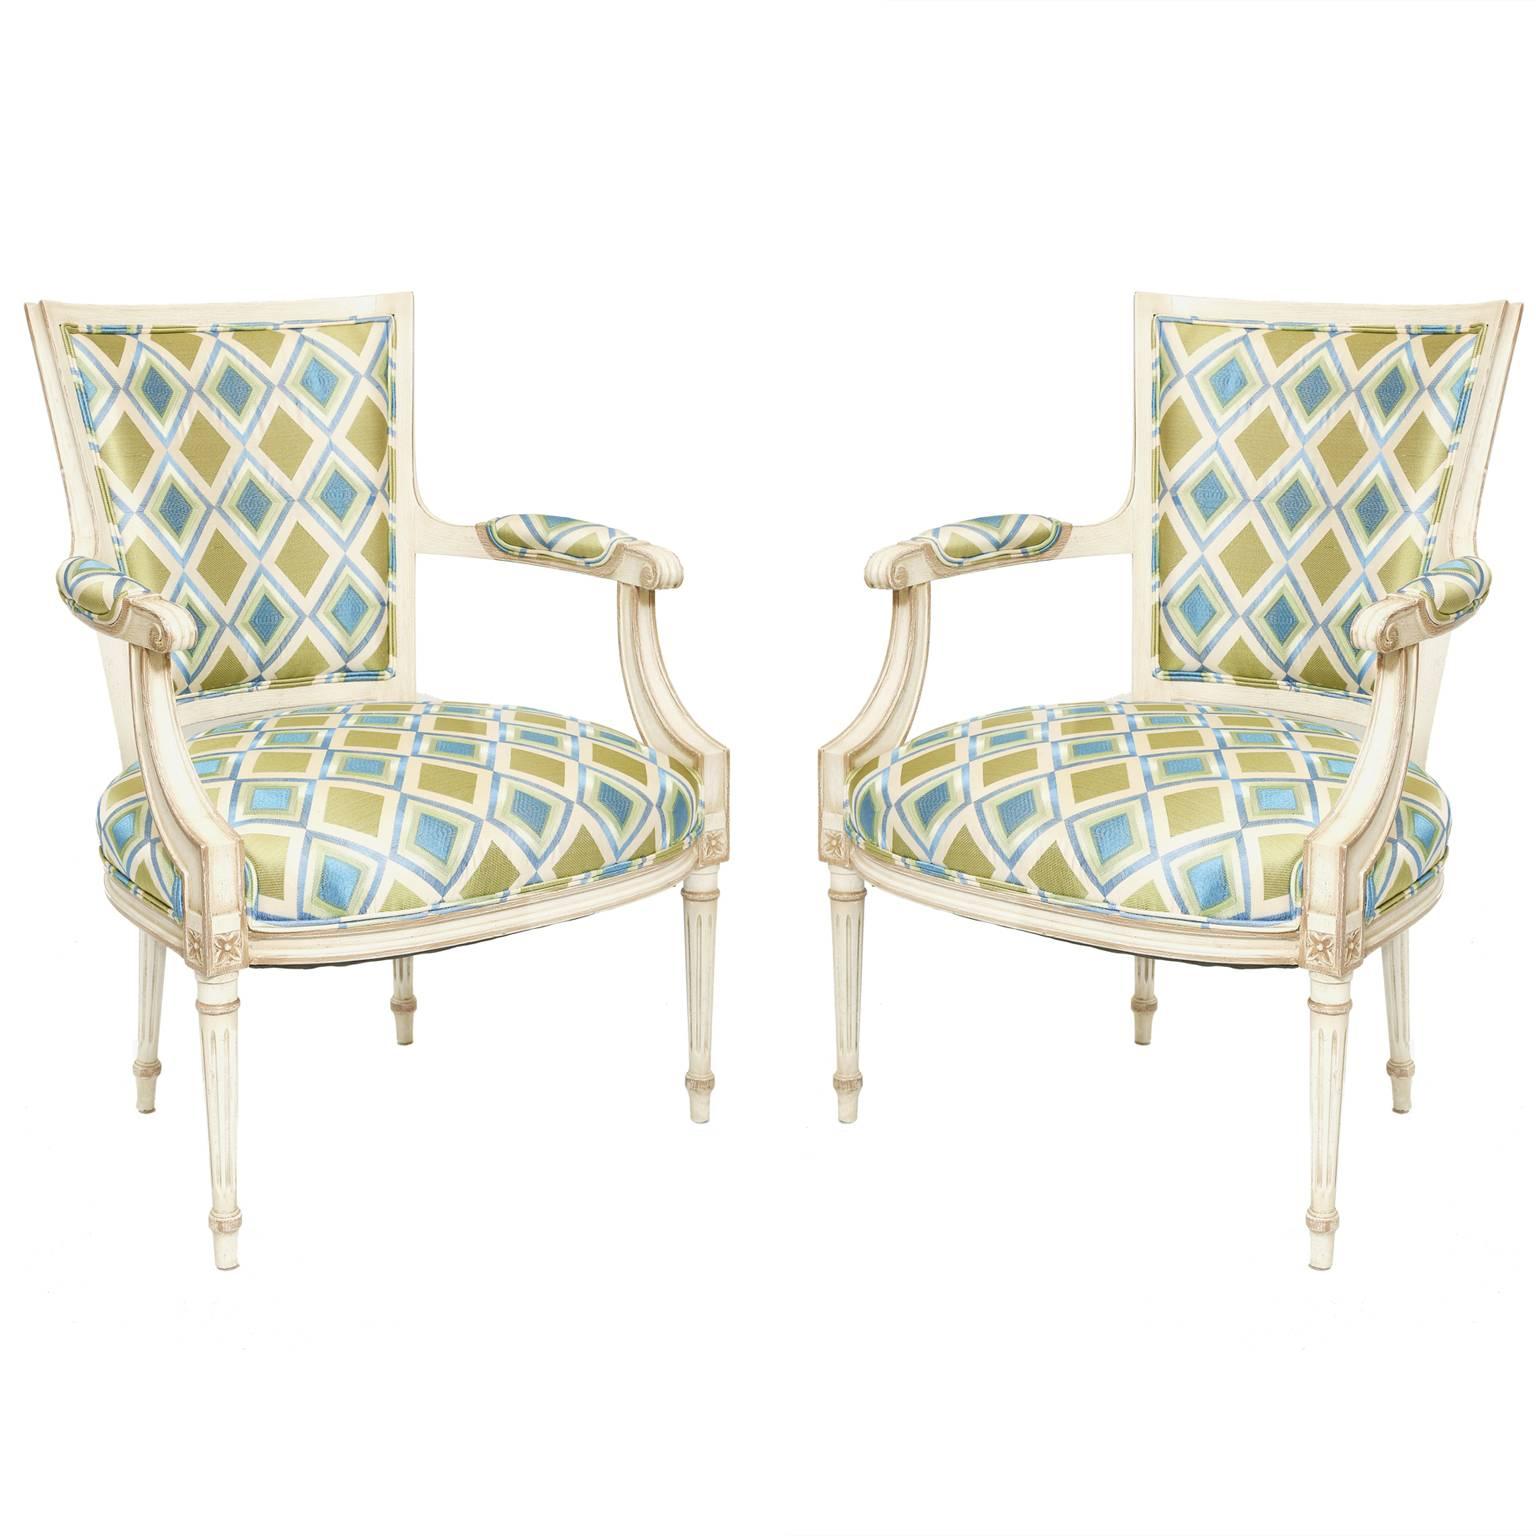 Pair of Painted French Fauteuils